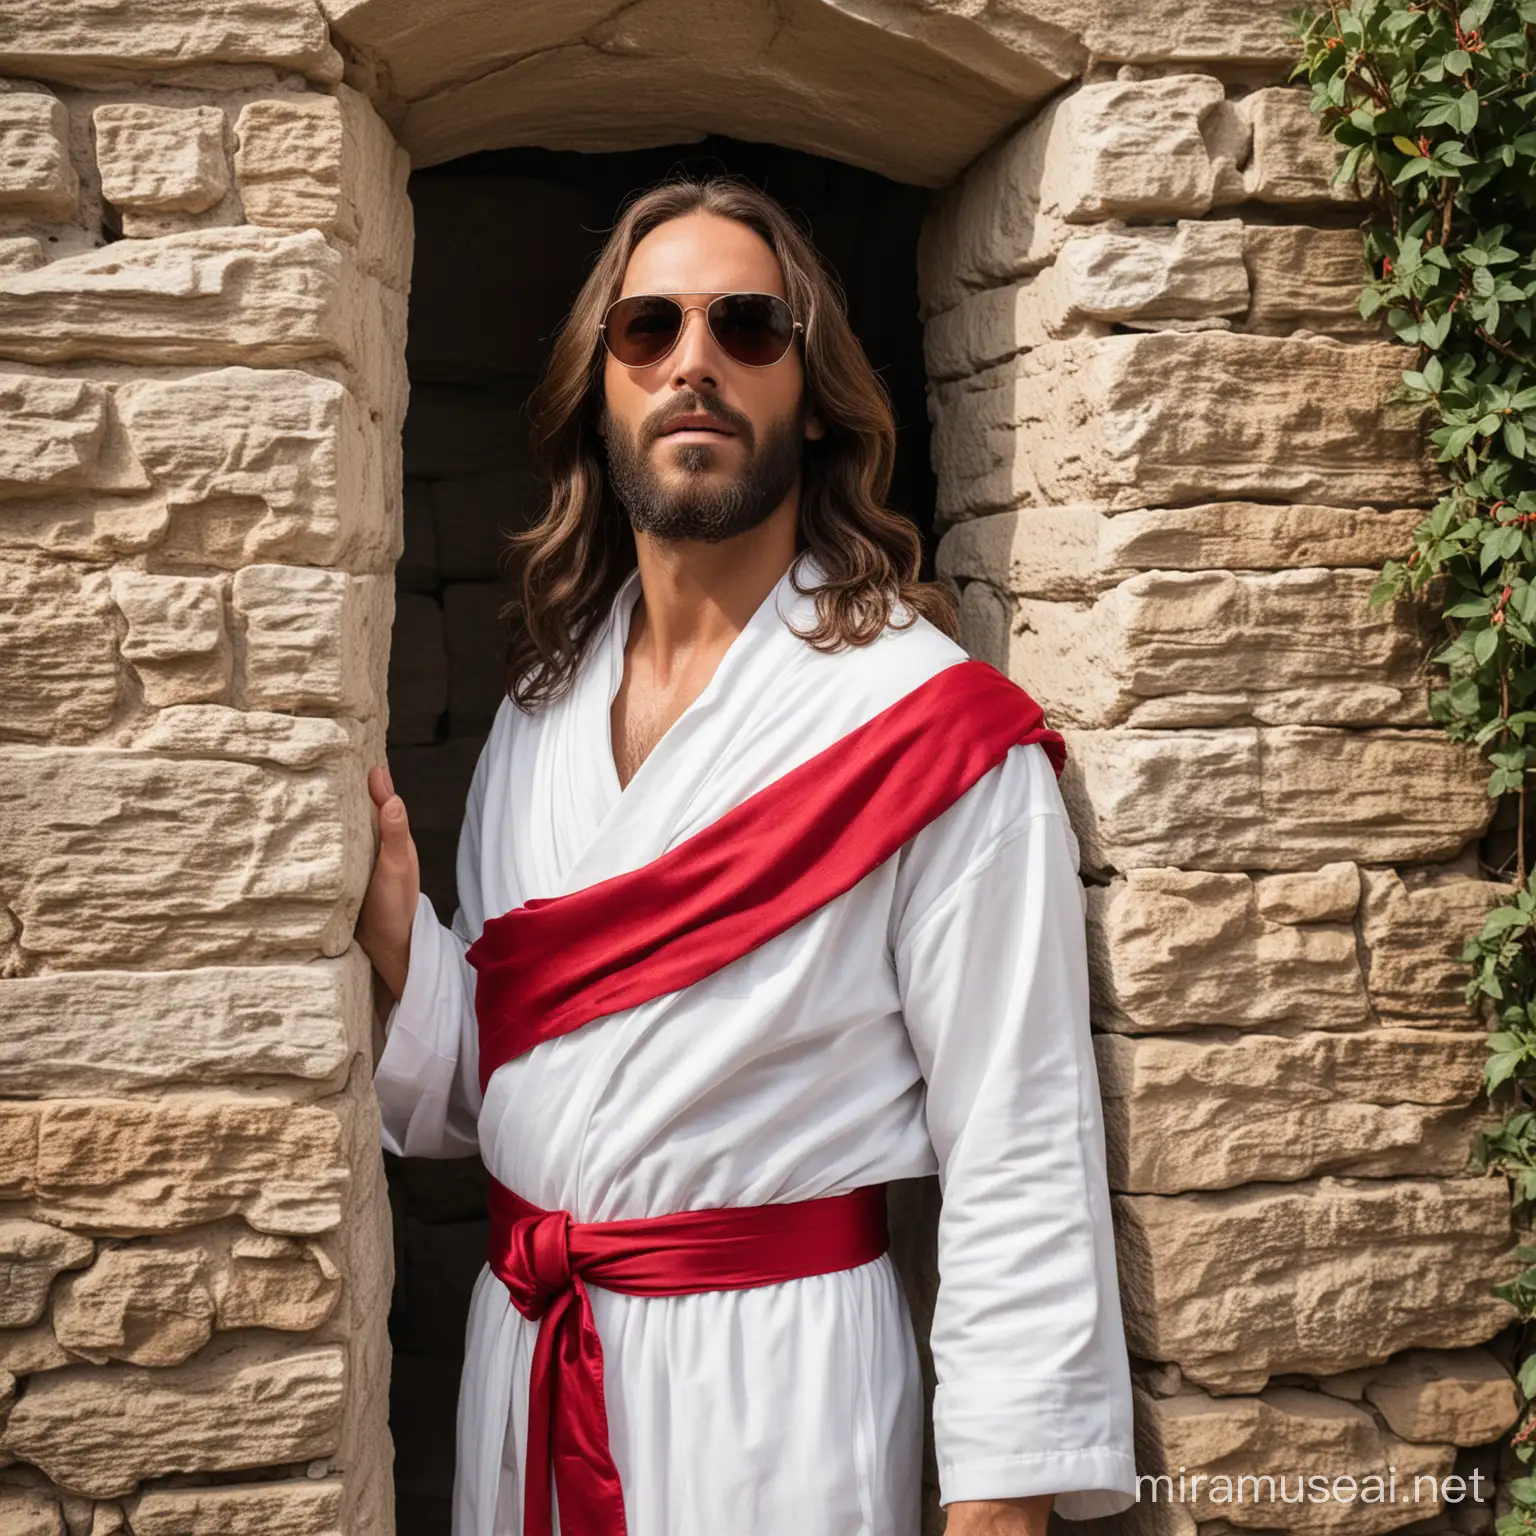 Jesus wearing a white robe with a red sash and aviator sunglasses. Peeking out of his natural stone tomb saying I'm back